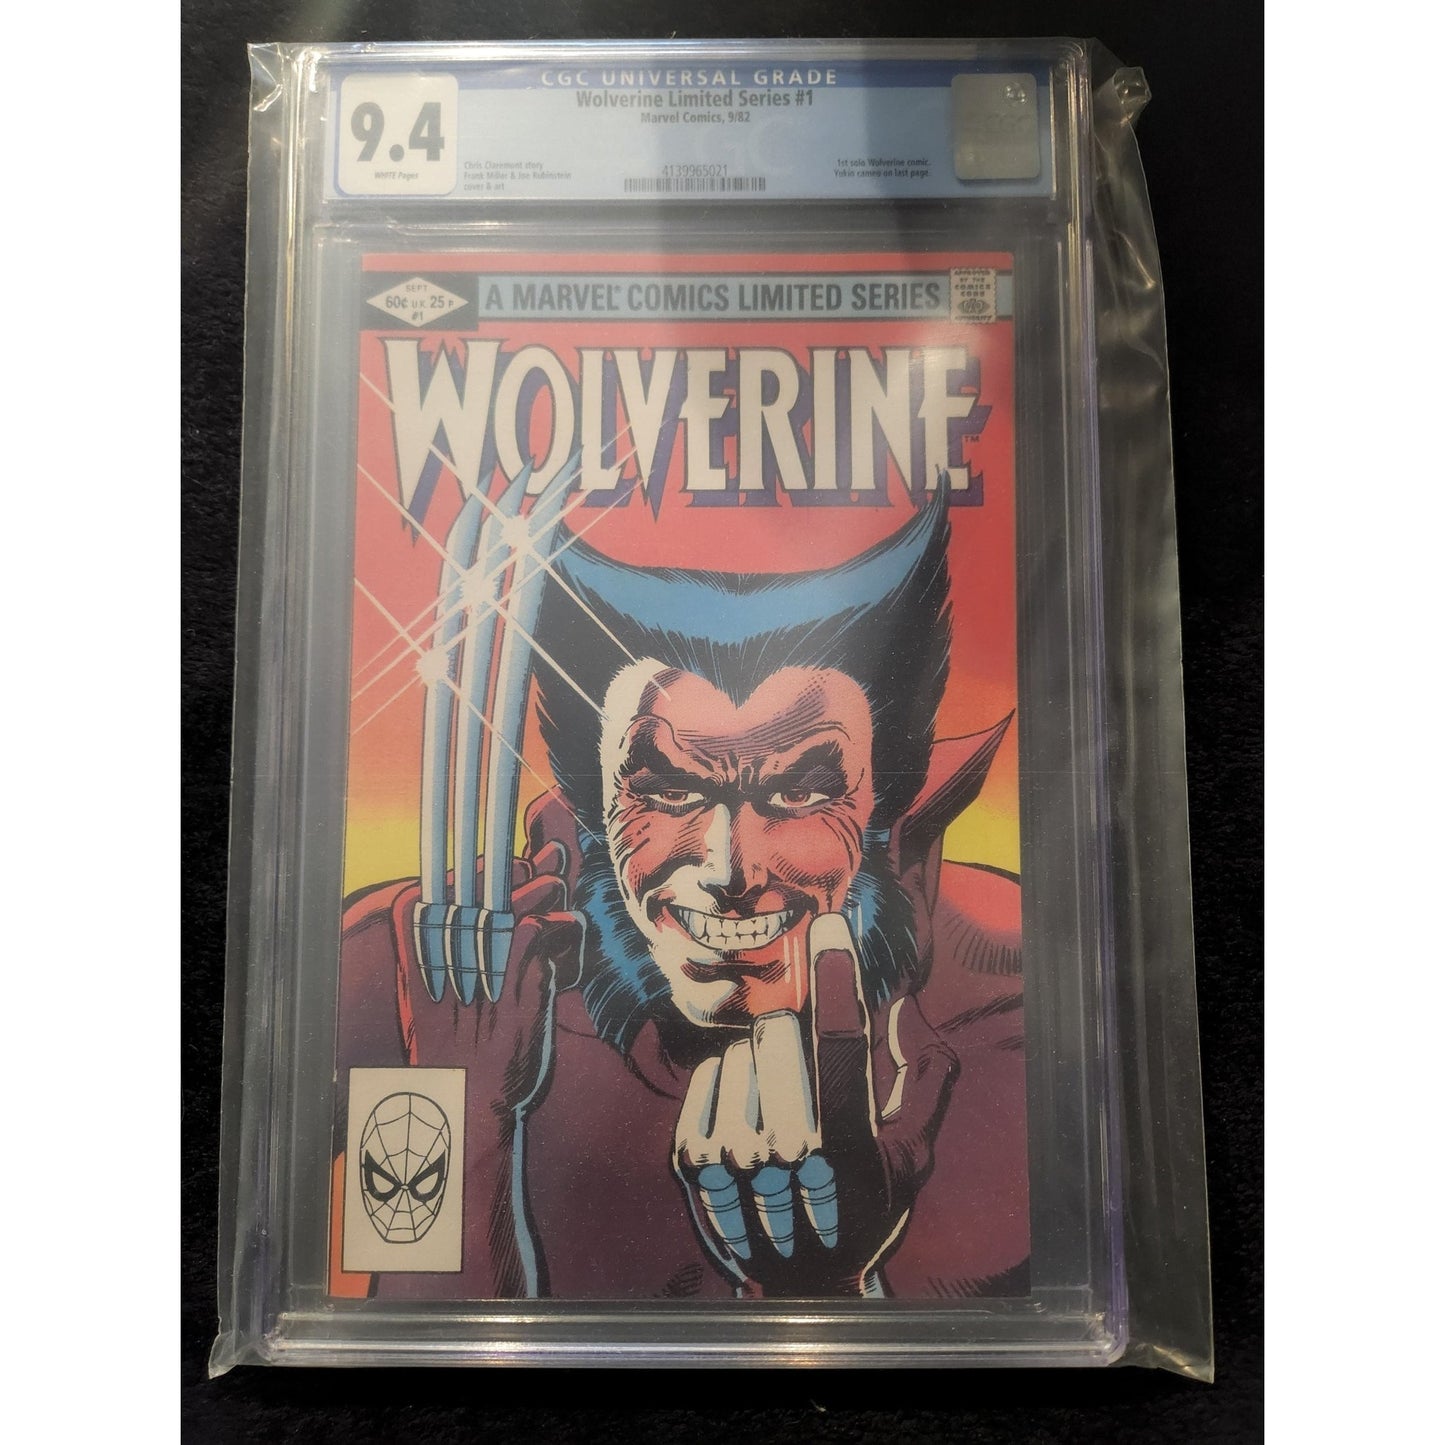 CGC Graded Wolverine #1 Limited Series 9.4 - Redshift7toys.com